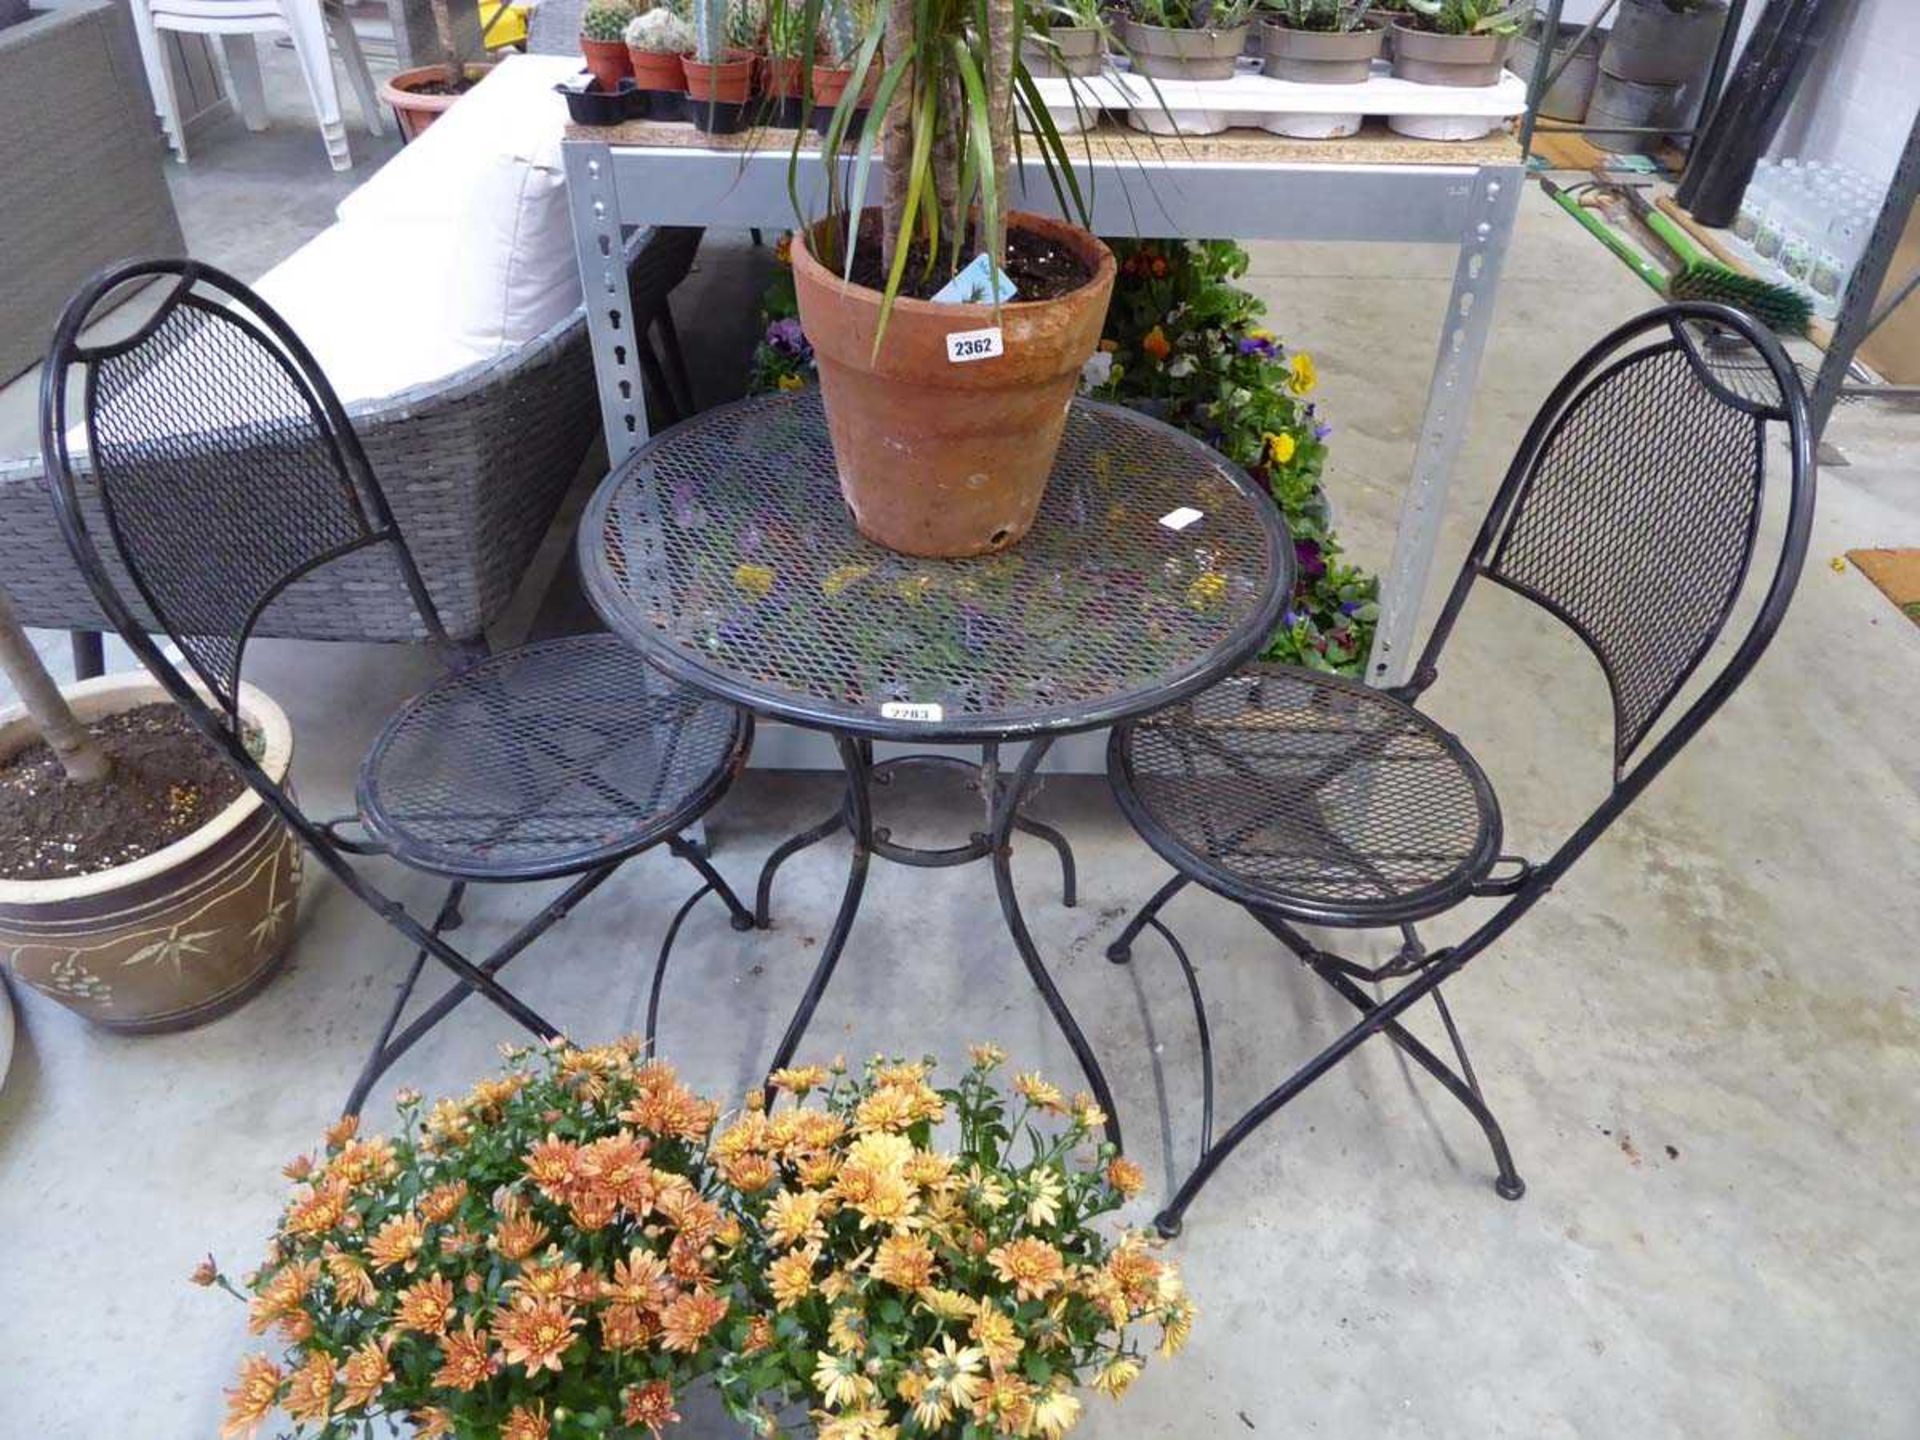 Black mesh three piece garden bistro set, two chairs and a table